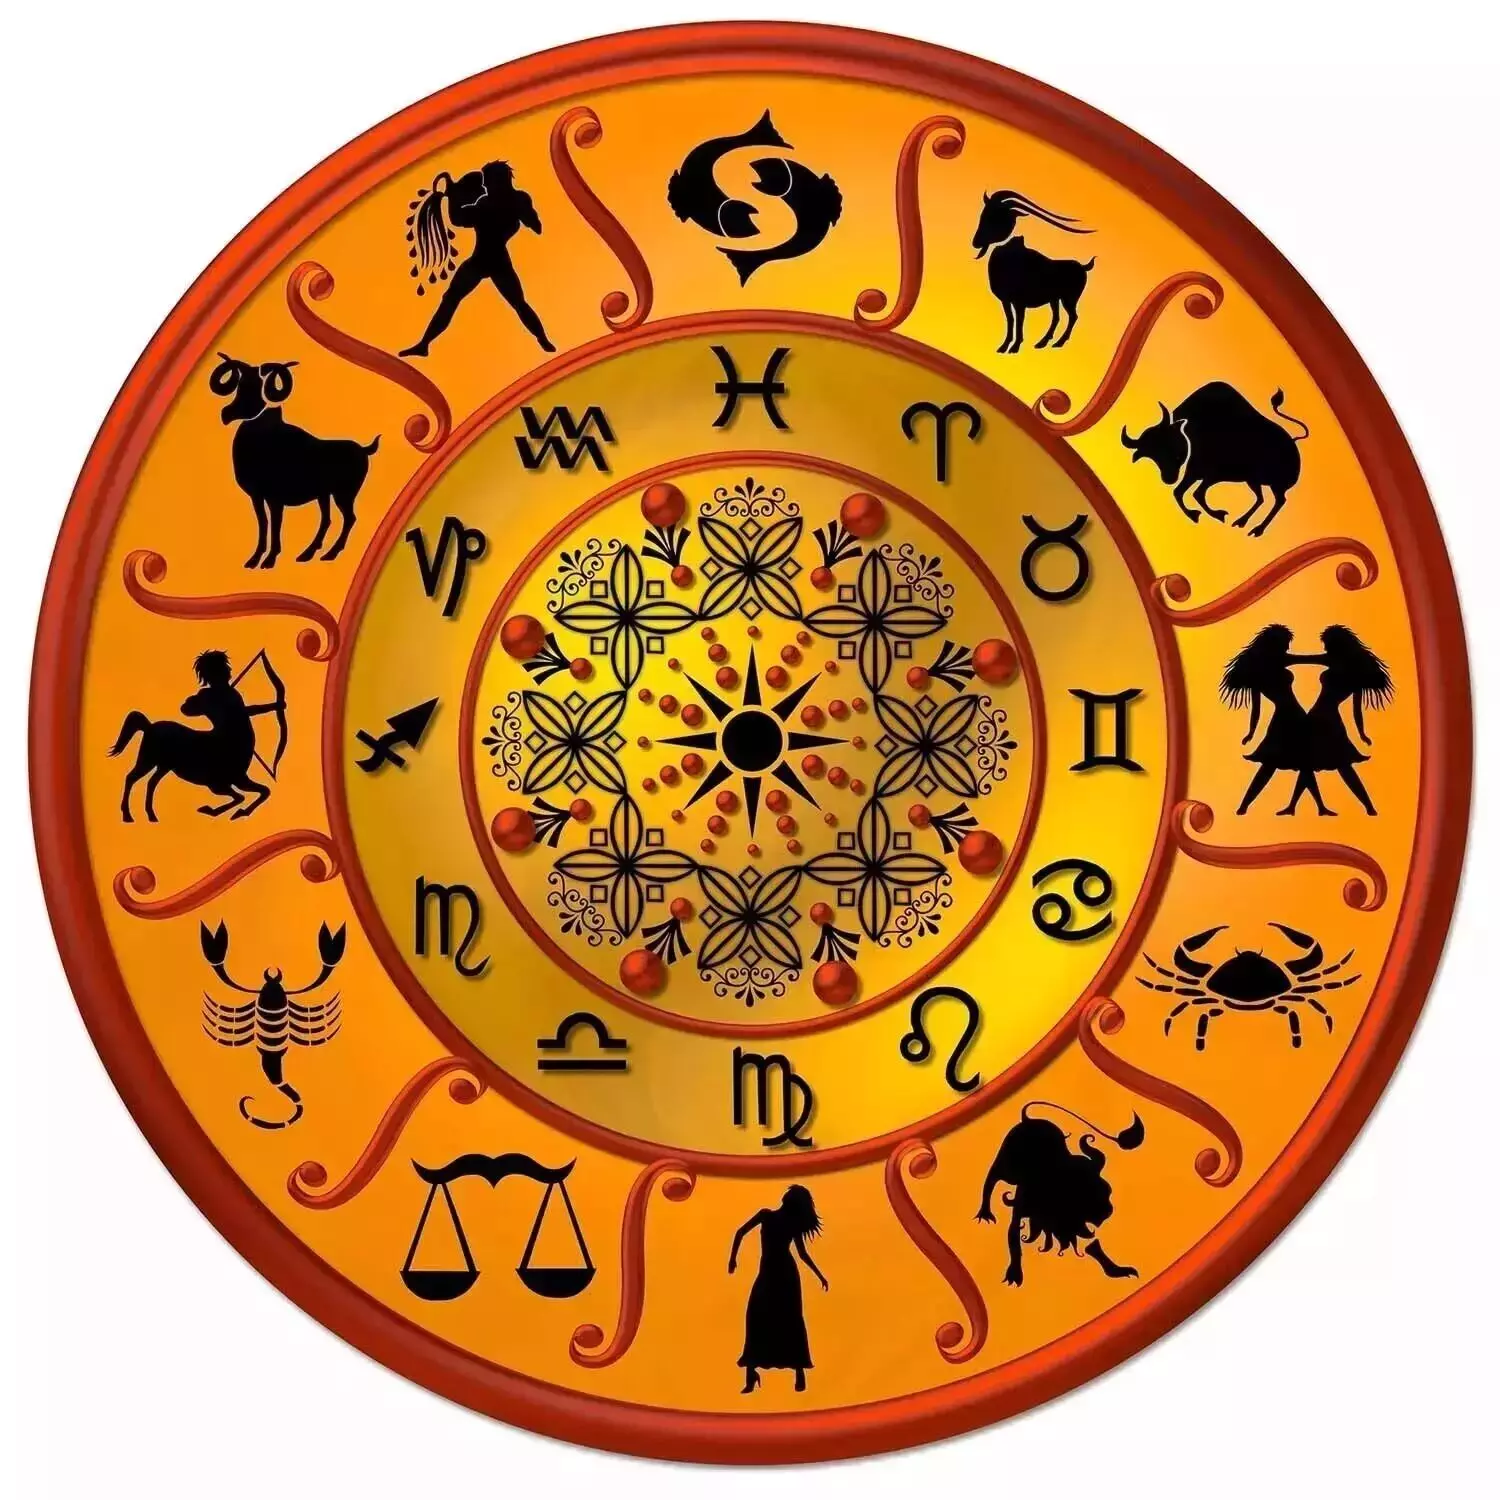 25 January – Know your todays horoscope